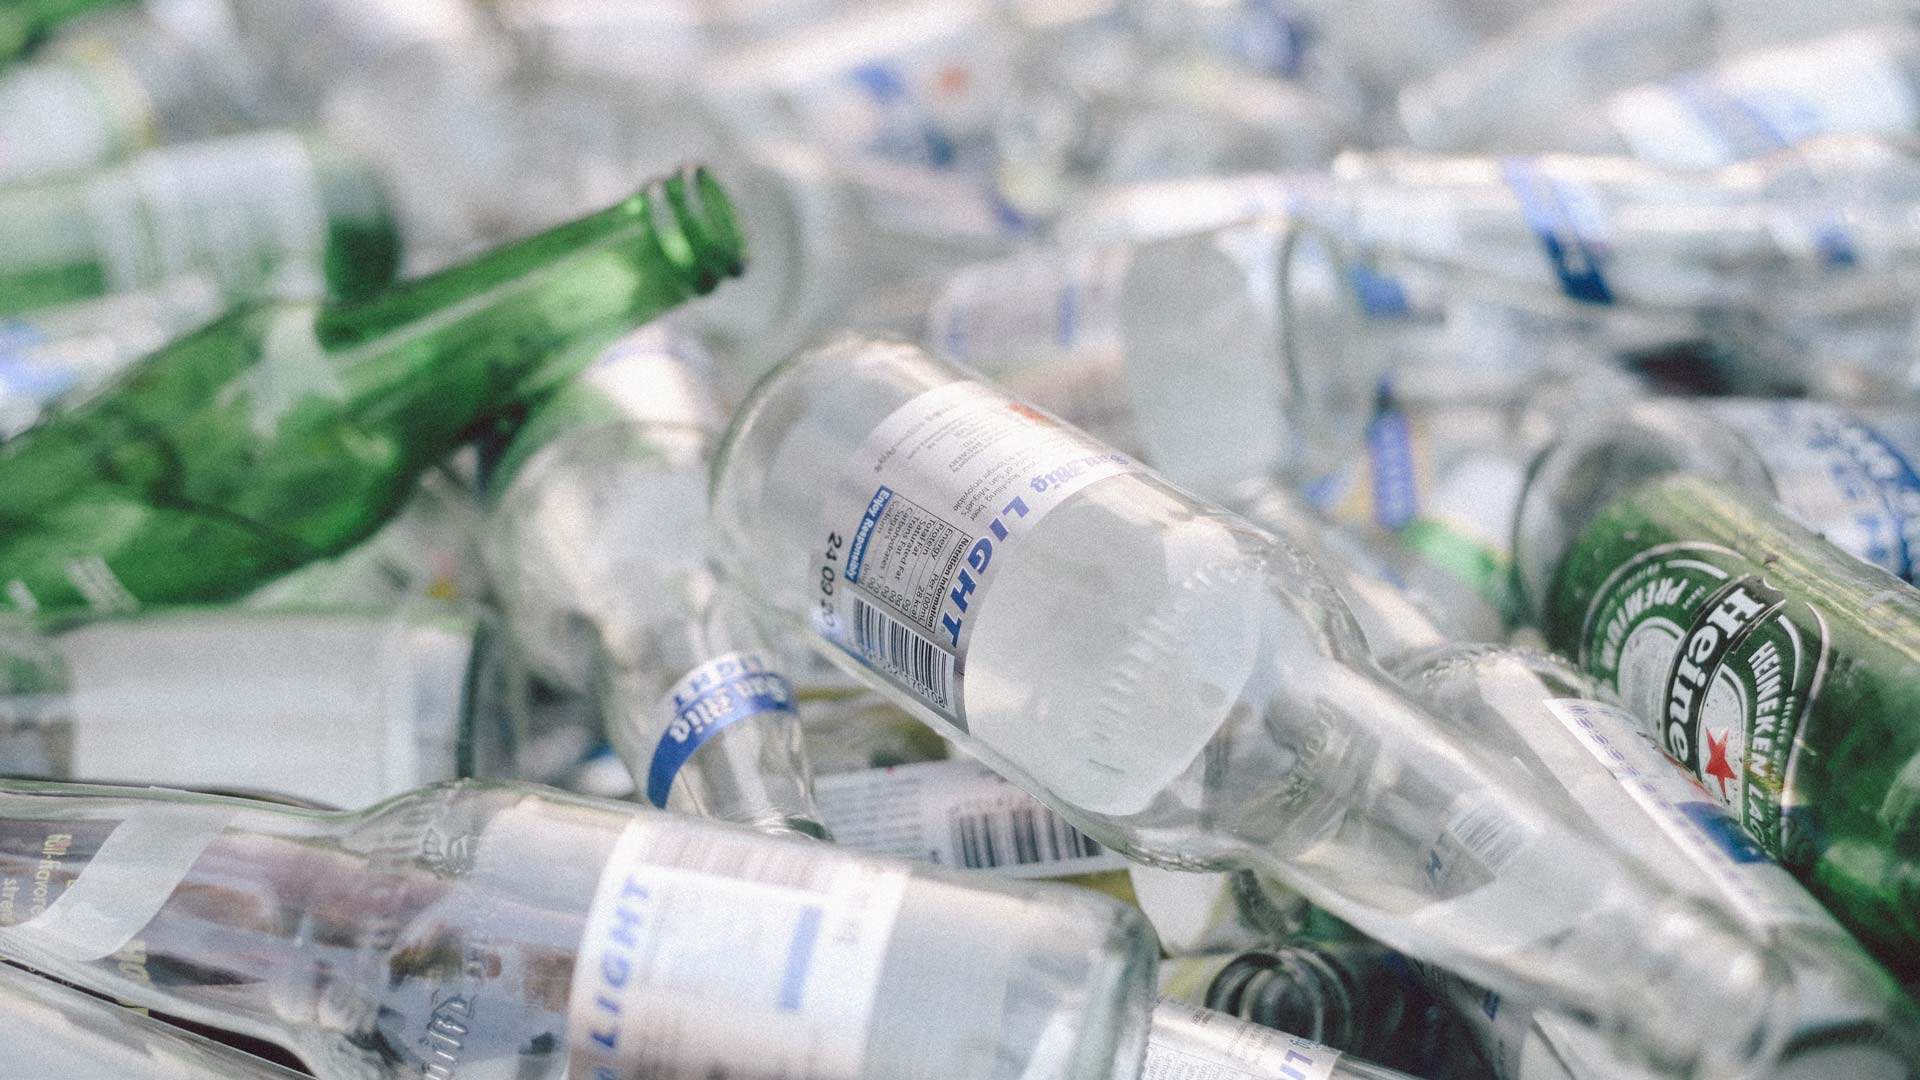 Victoria Will Finally Introduce a Container Deposit Scheme as Part of a Recycling Overhaul